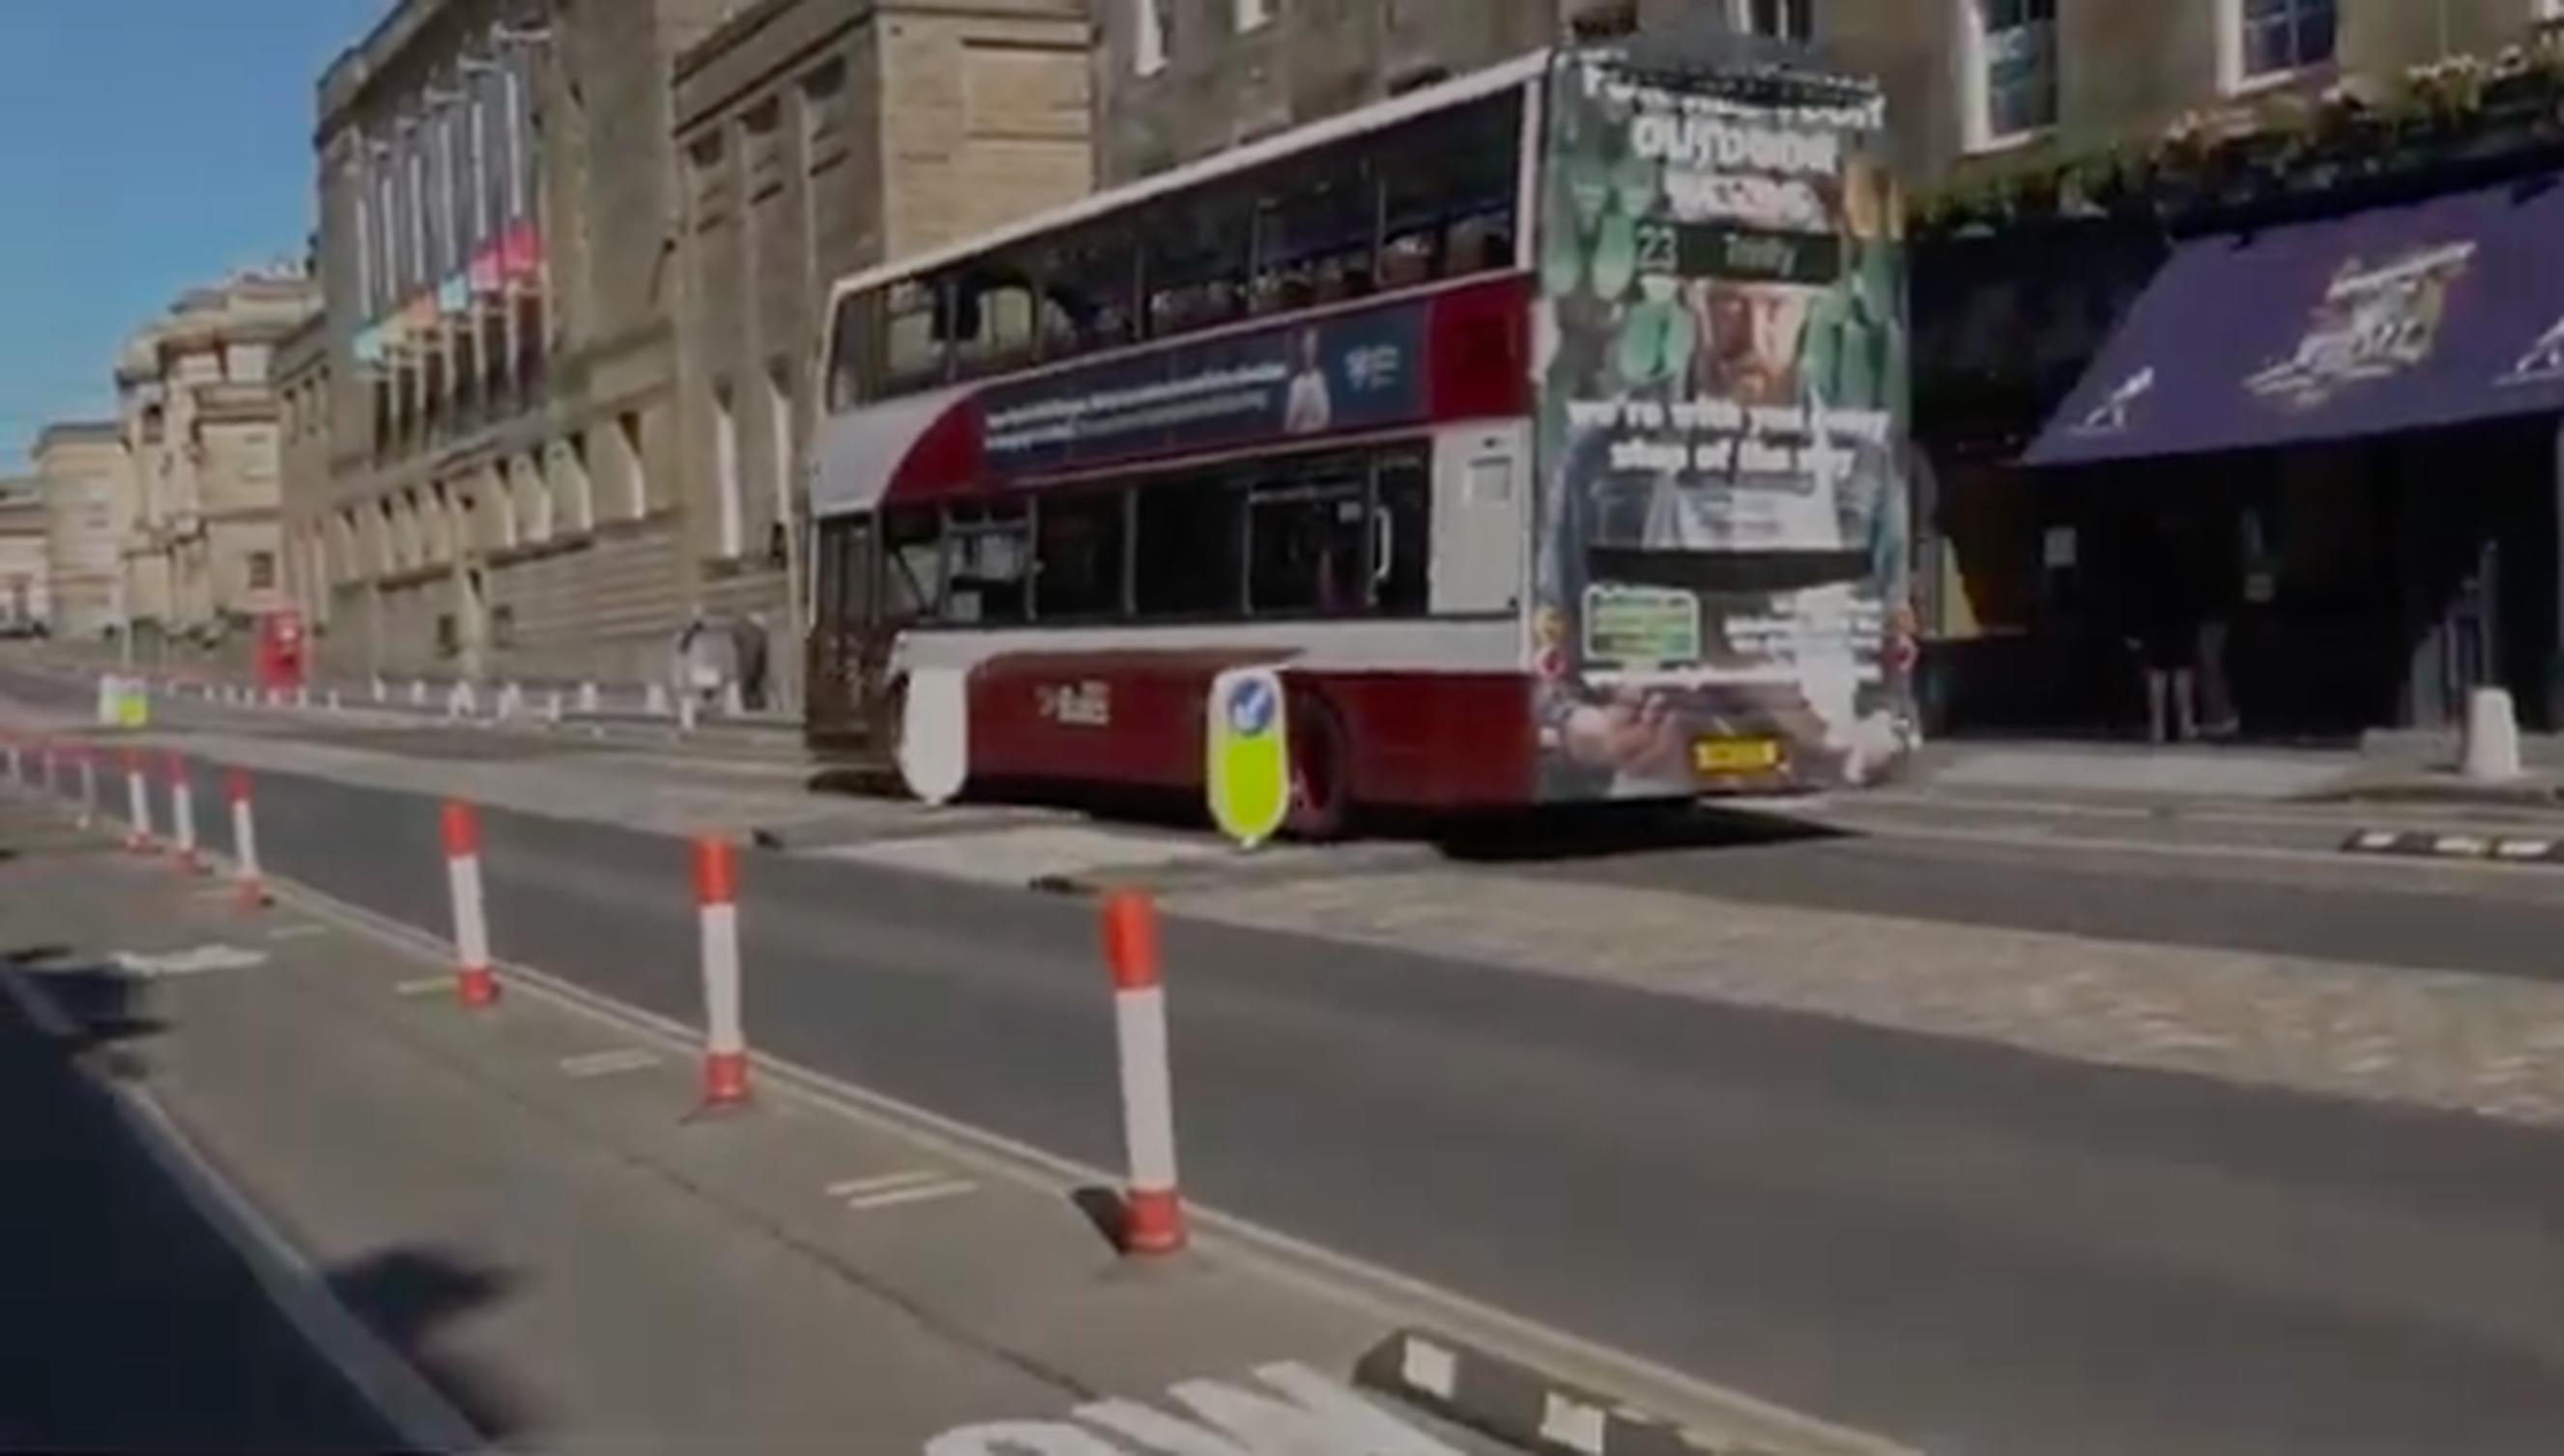 The video records a bus driving down the wrong side of a pedestrian refuge island to overtake the parked taxi